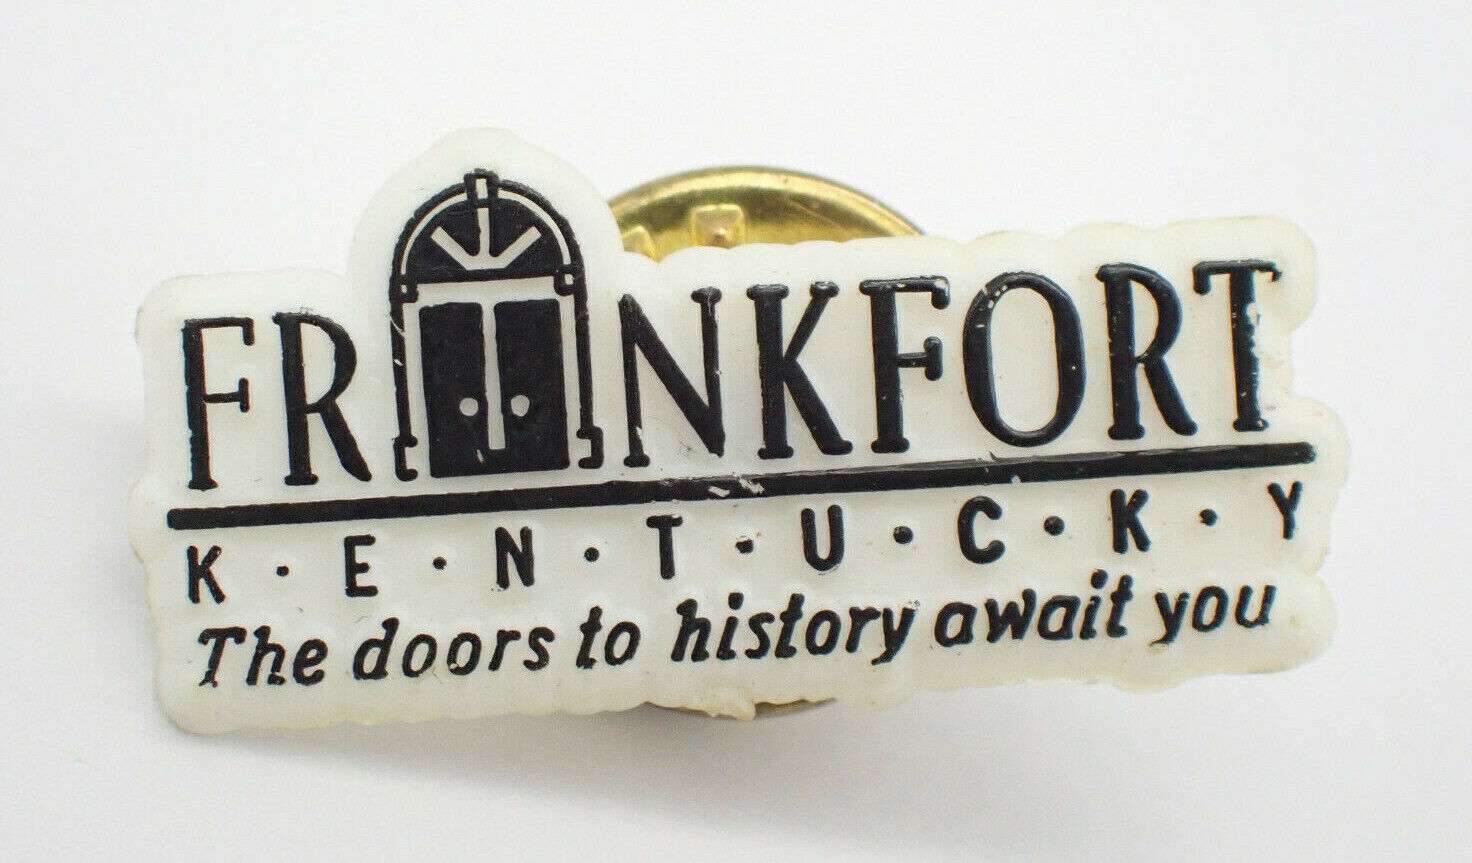 Frankfort Kentucky The Doors To History Await You Vintage Lapel Pin 